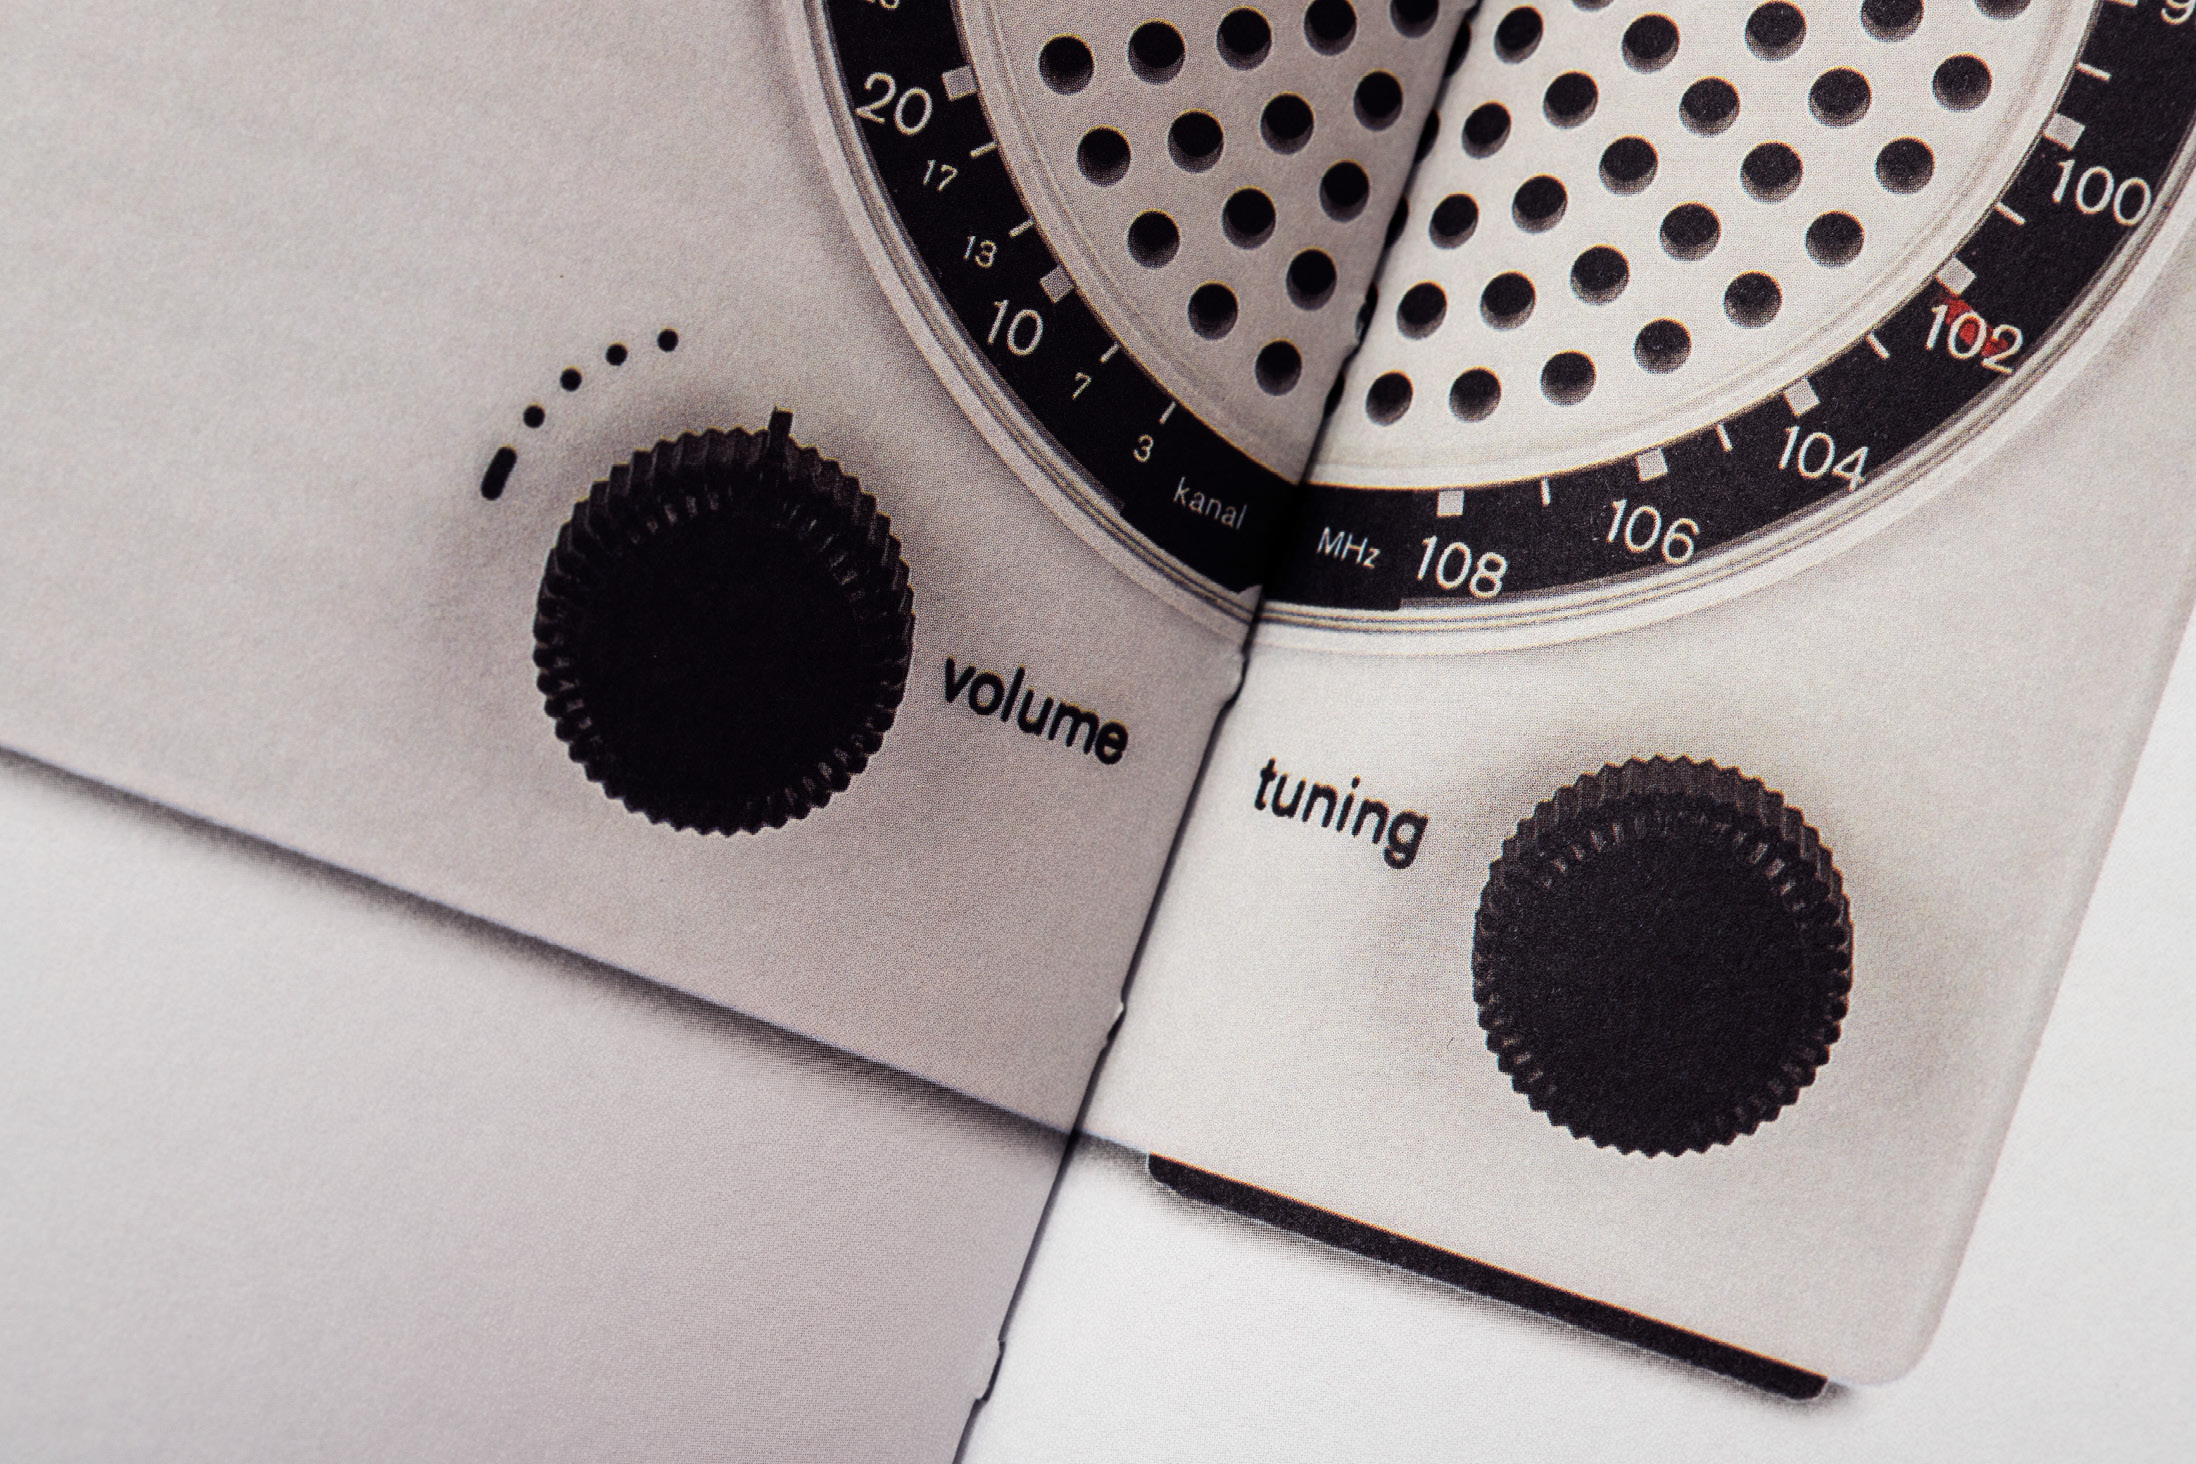 Dieter Rams: The Complete Works+crystalchambers.co.uk